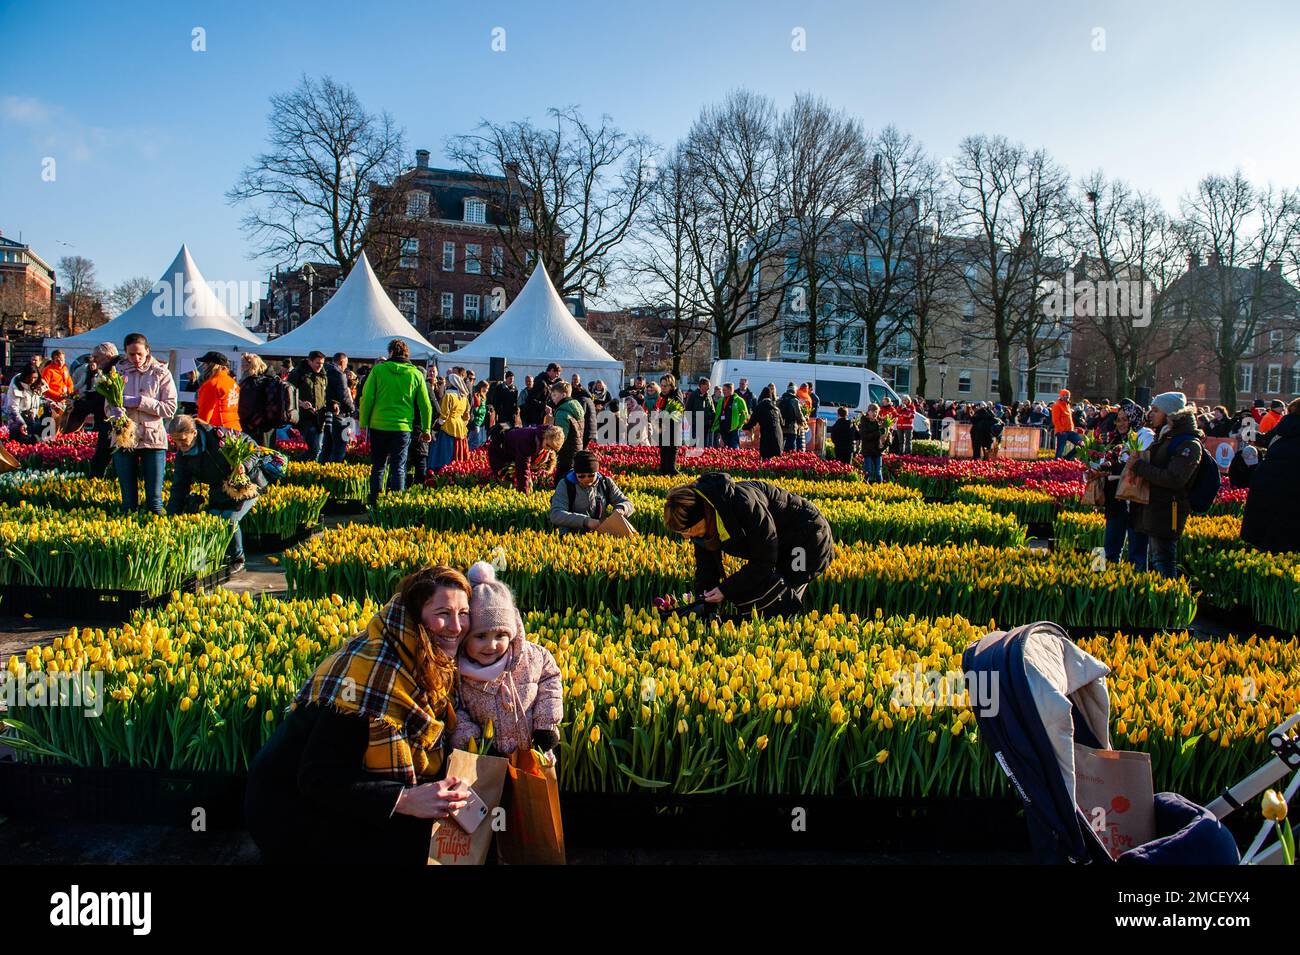 A woman seen posing with her daughter surrounded by hundreds of tulips. Each year on the 3rd Saturday of January, the National Tulip Day is celebrated in Amsterdam. Dutch tulip growers built a huge picking garden with more than 200,000 colorful tulips at the Museumplein in Amsterdam. Visitors are allowed to pick tulips for free. The event was opened by Olympic skating champion, Irene Schouten. Prior to the opening, she christened a new tulip: Tulipa 'Dutch Pearl' as a reference to the world - famous painting 'The girl with a pearl earring' by Johannes Vermeer. (Photo by Ana Fernandez/SOPA Im Stock Photo